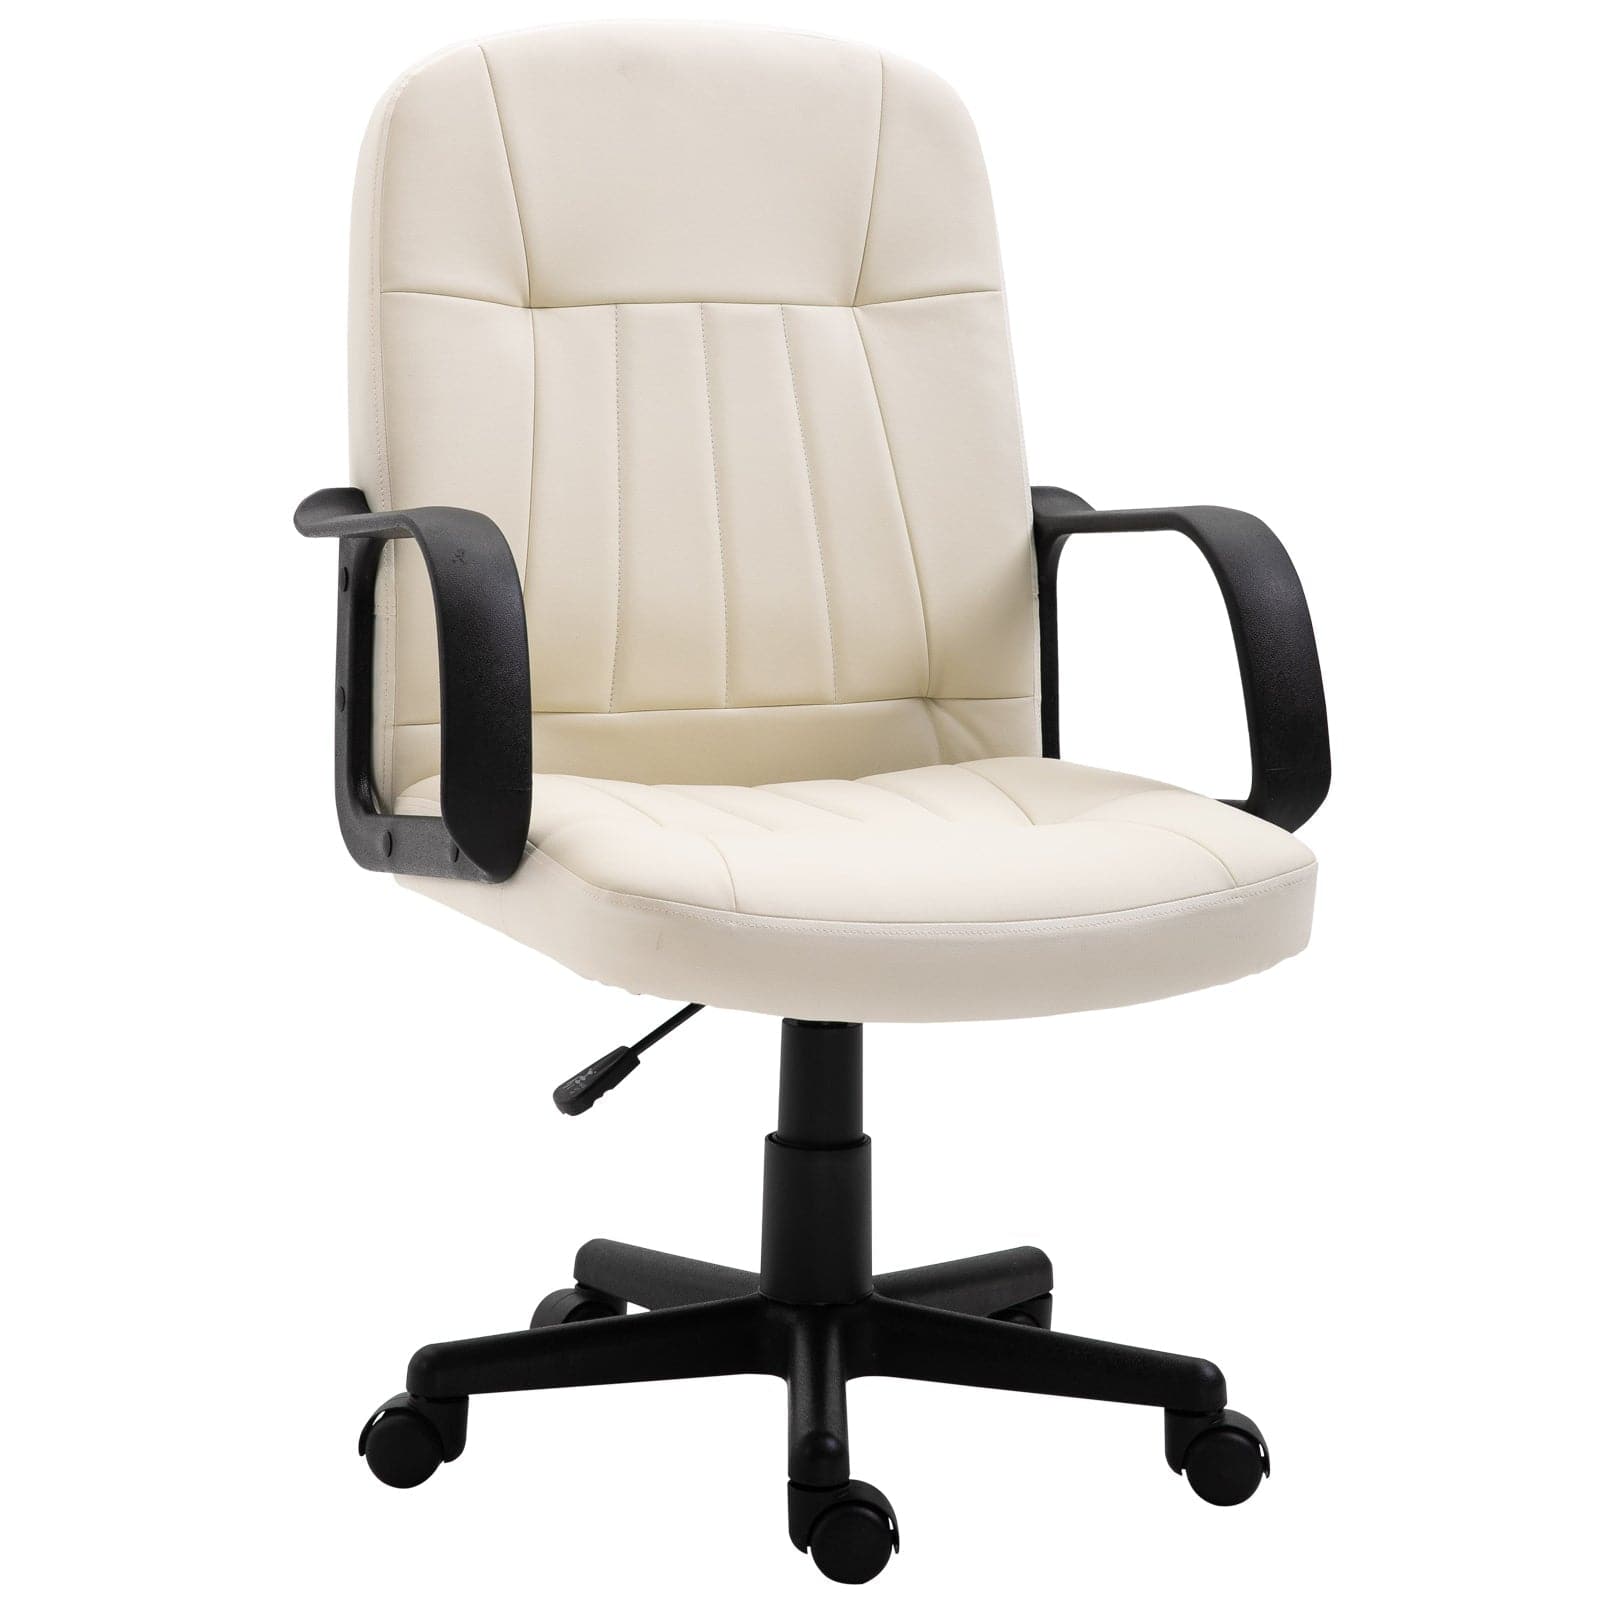 ProperAV PU Leather Swivel Home Office Chair with Armrest (Cream)